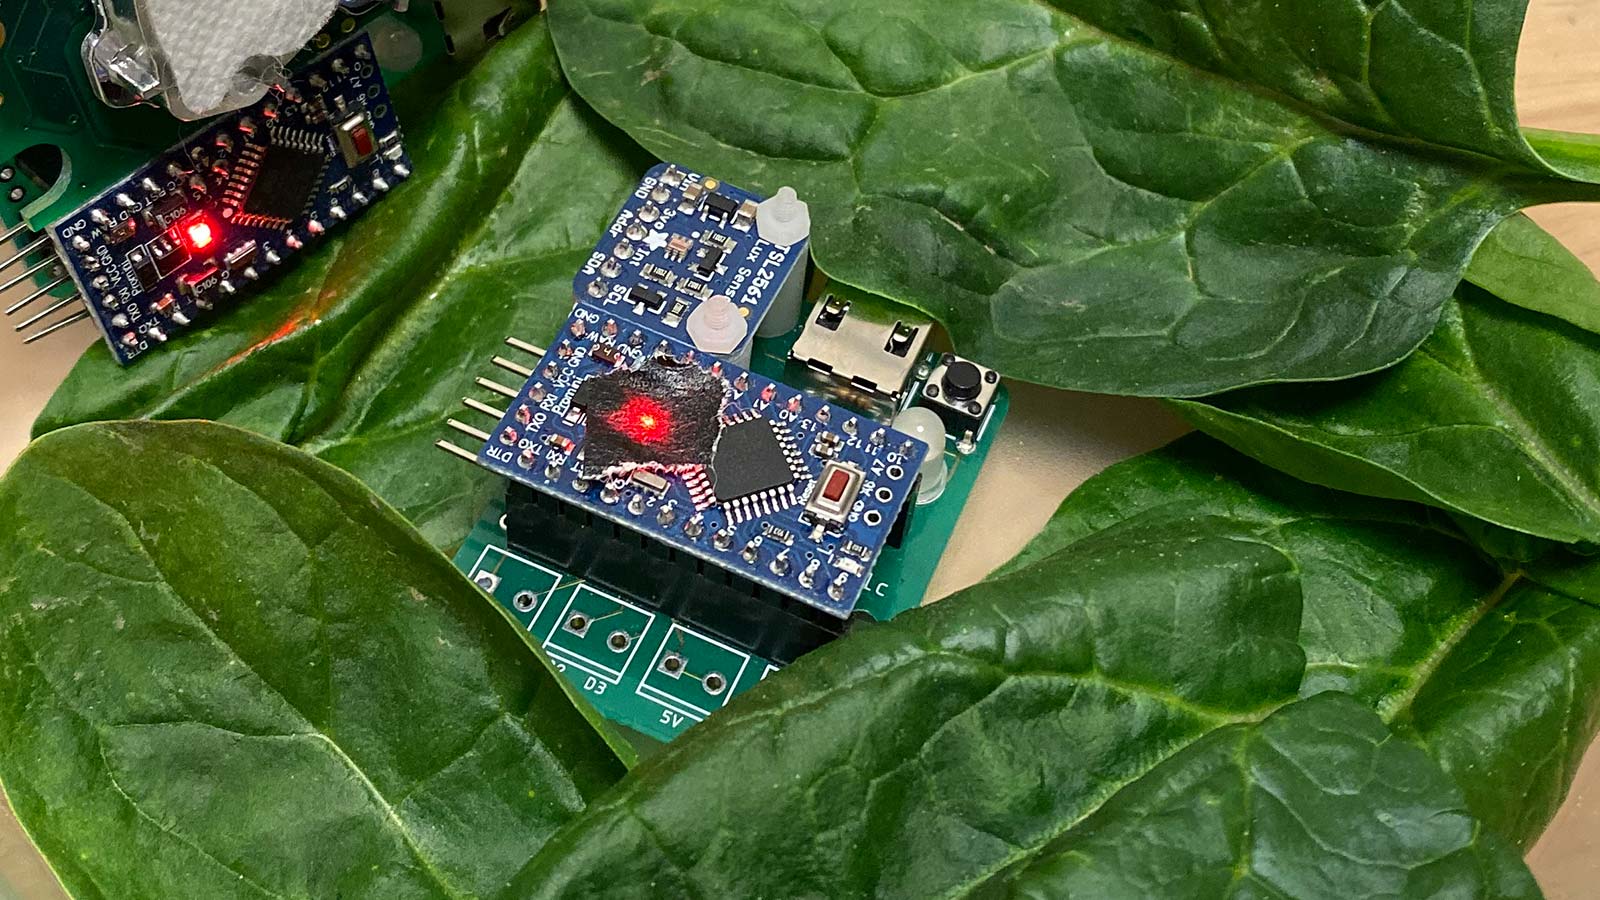 Sensors and Spinach